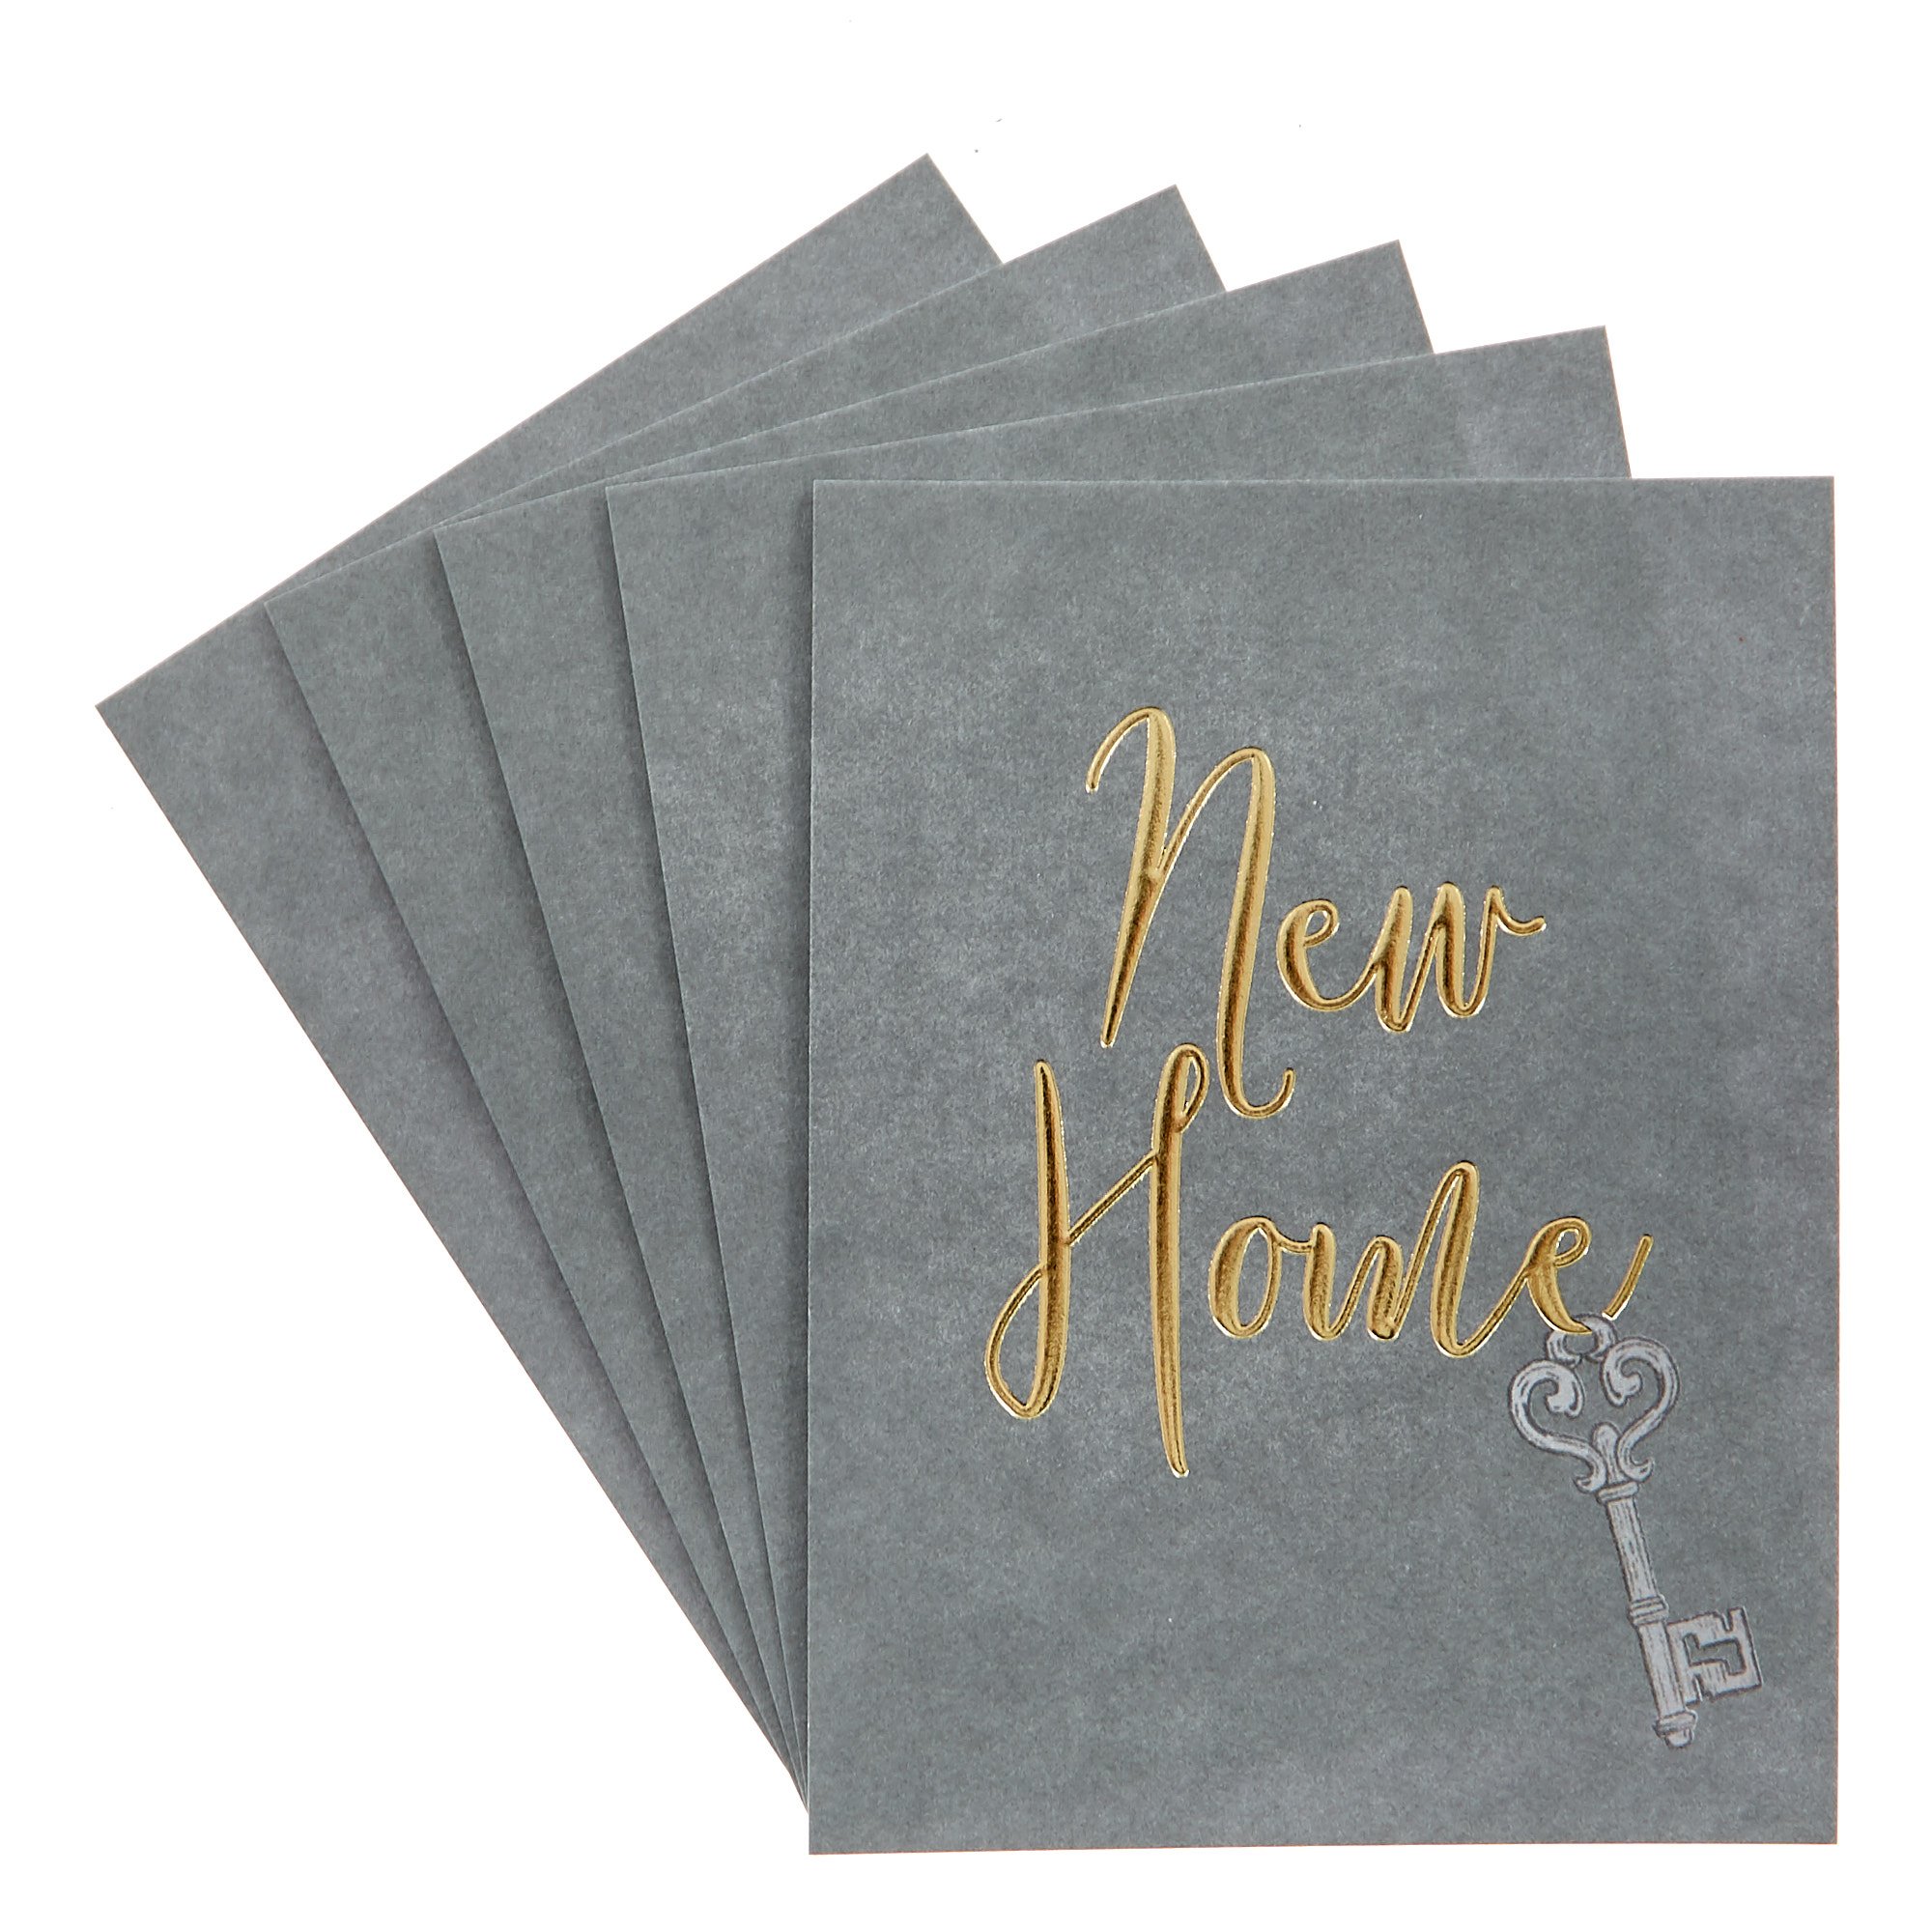 New Home Change Of Address Postcards - Pack Of 12